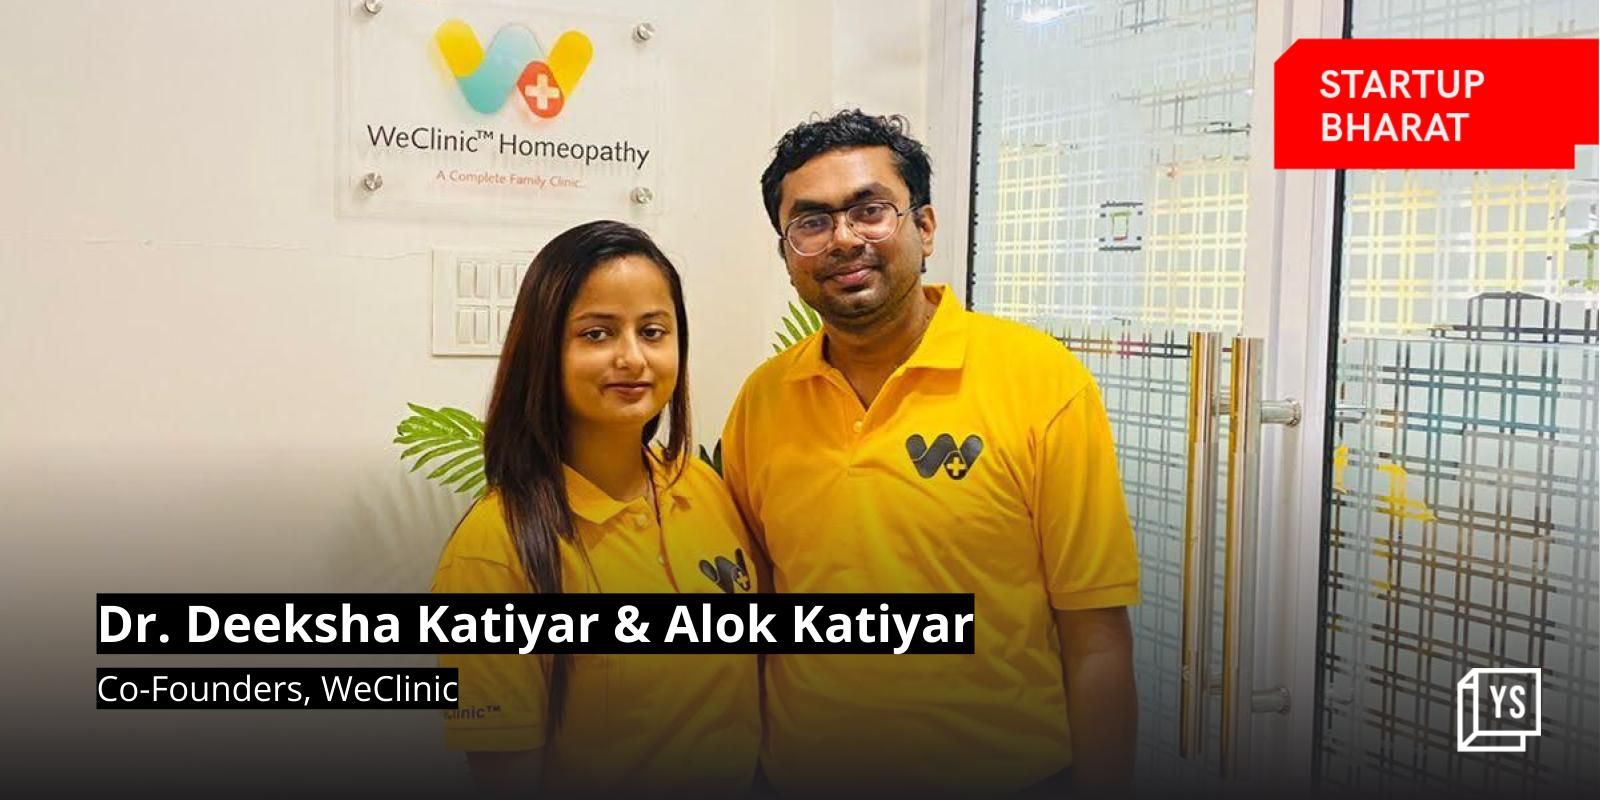 Connecting patients on WhatsApp, WeClinic is bringing teleconsultation to homeopathy 